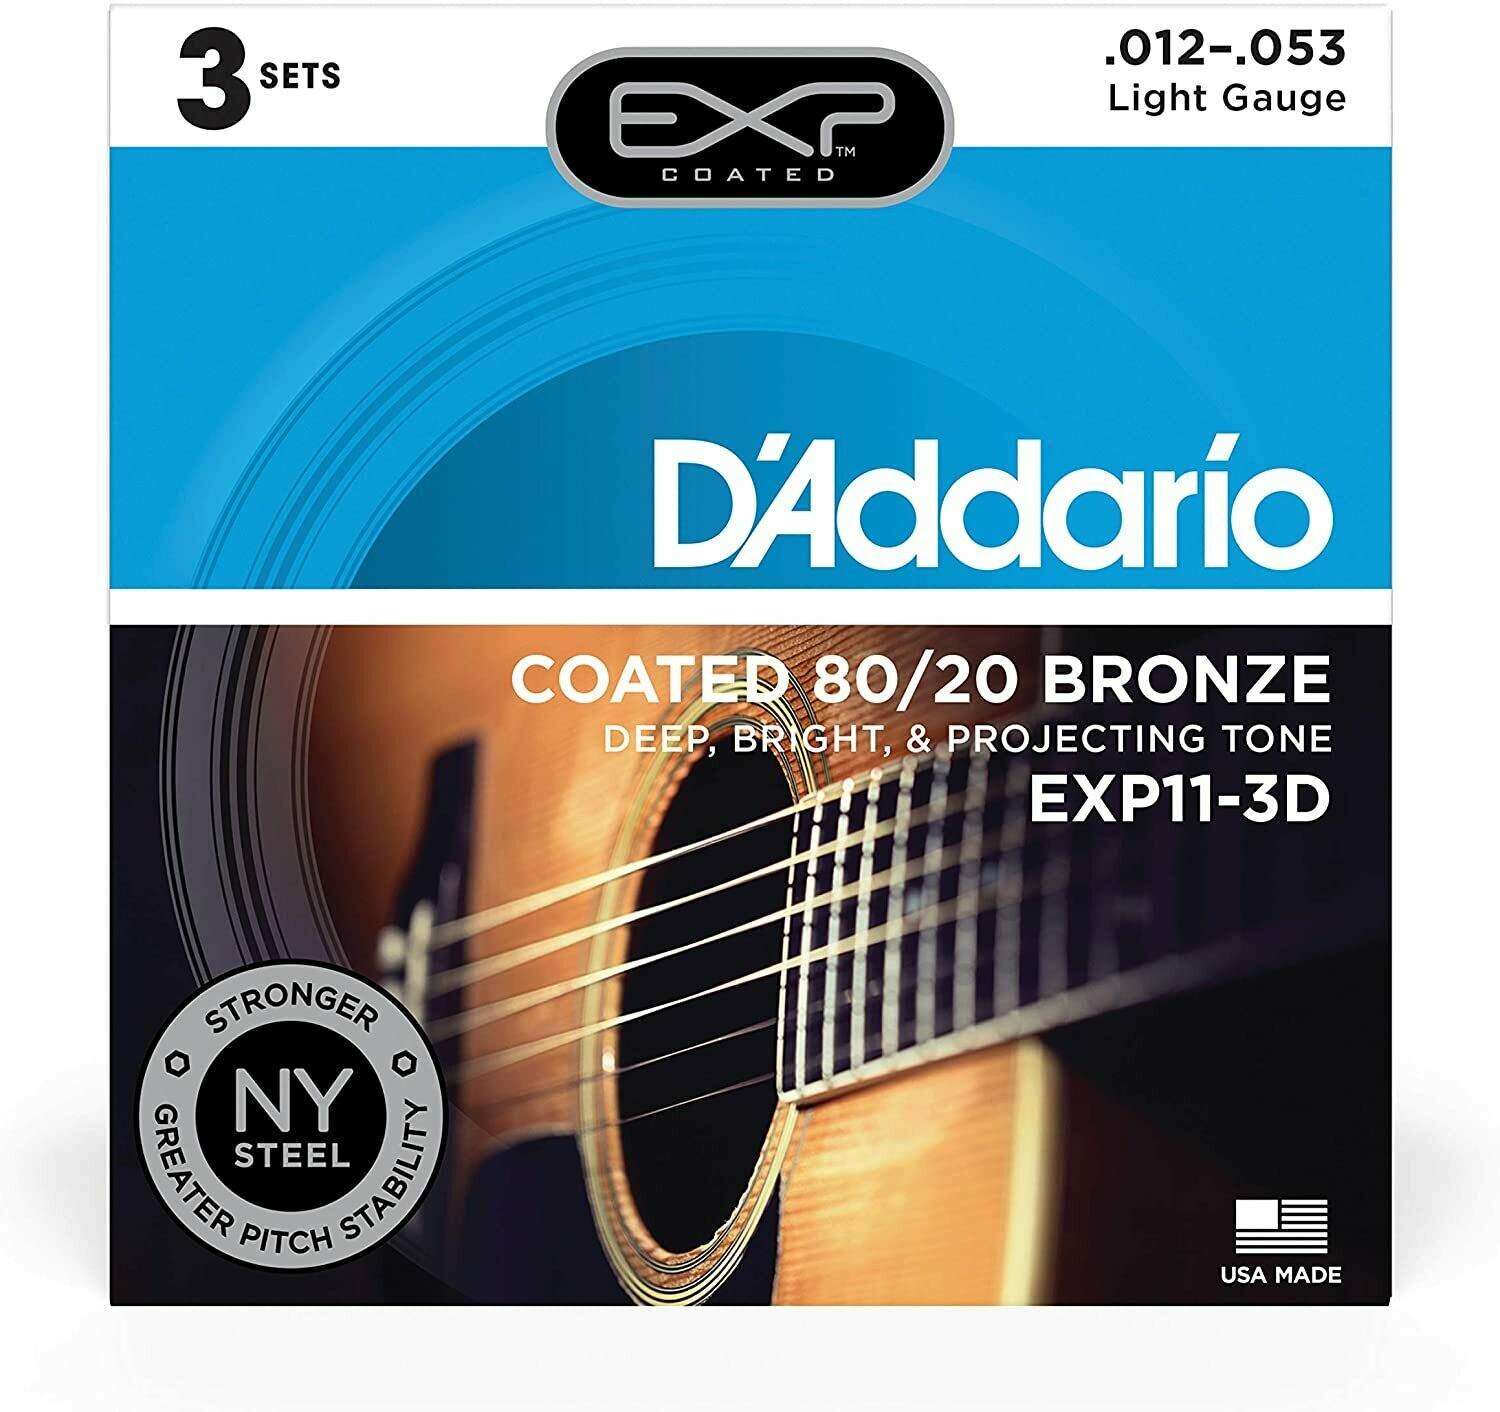 D'Addario EXP11-3D Coated Acoustic Steel String Guitar Strings, 80/20, Light, 12-53, 3 Sets